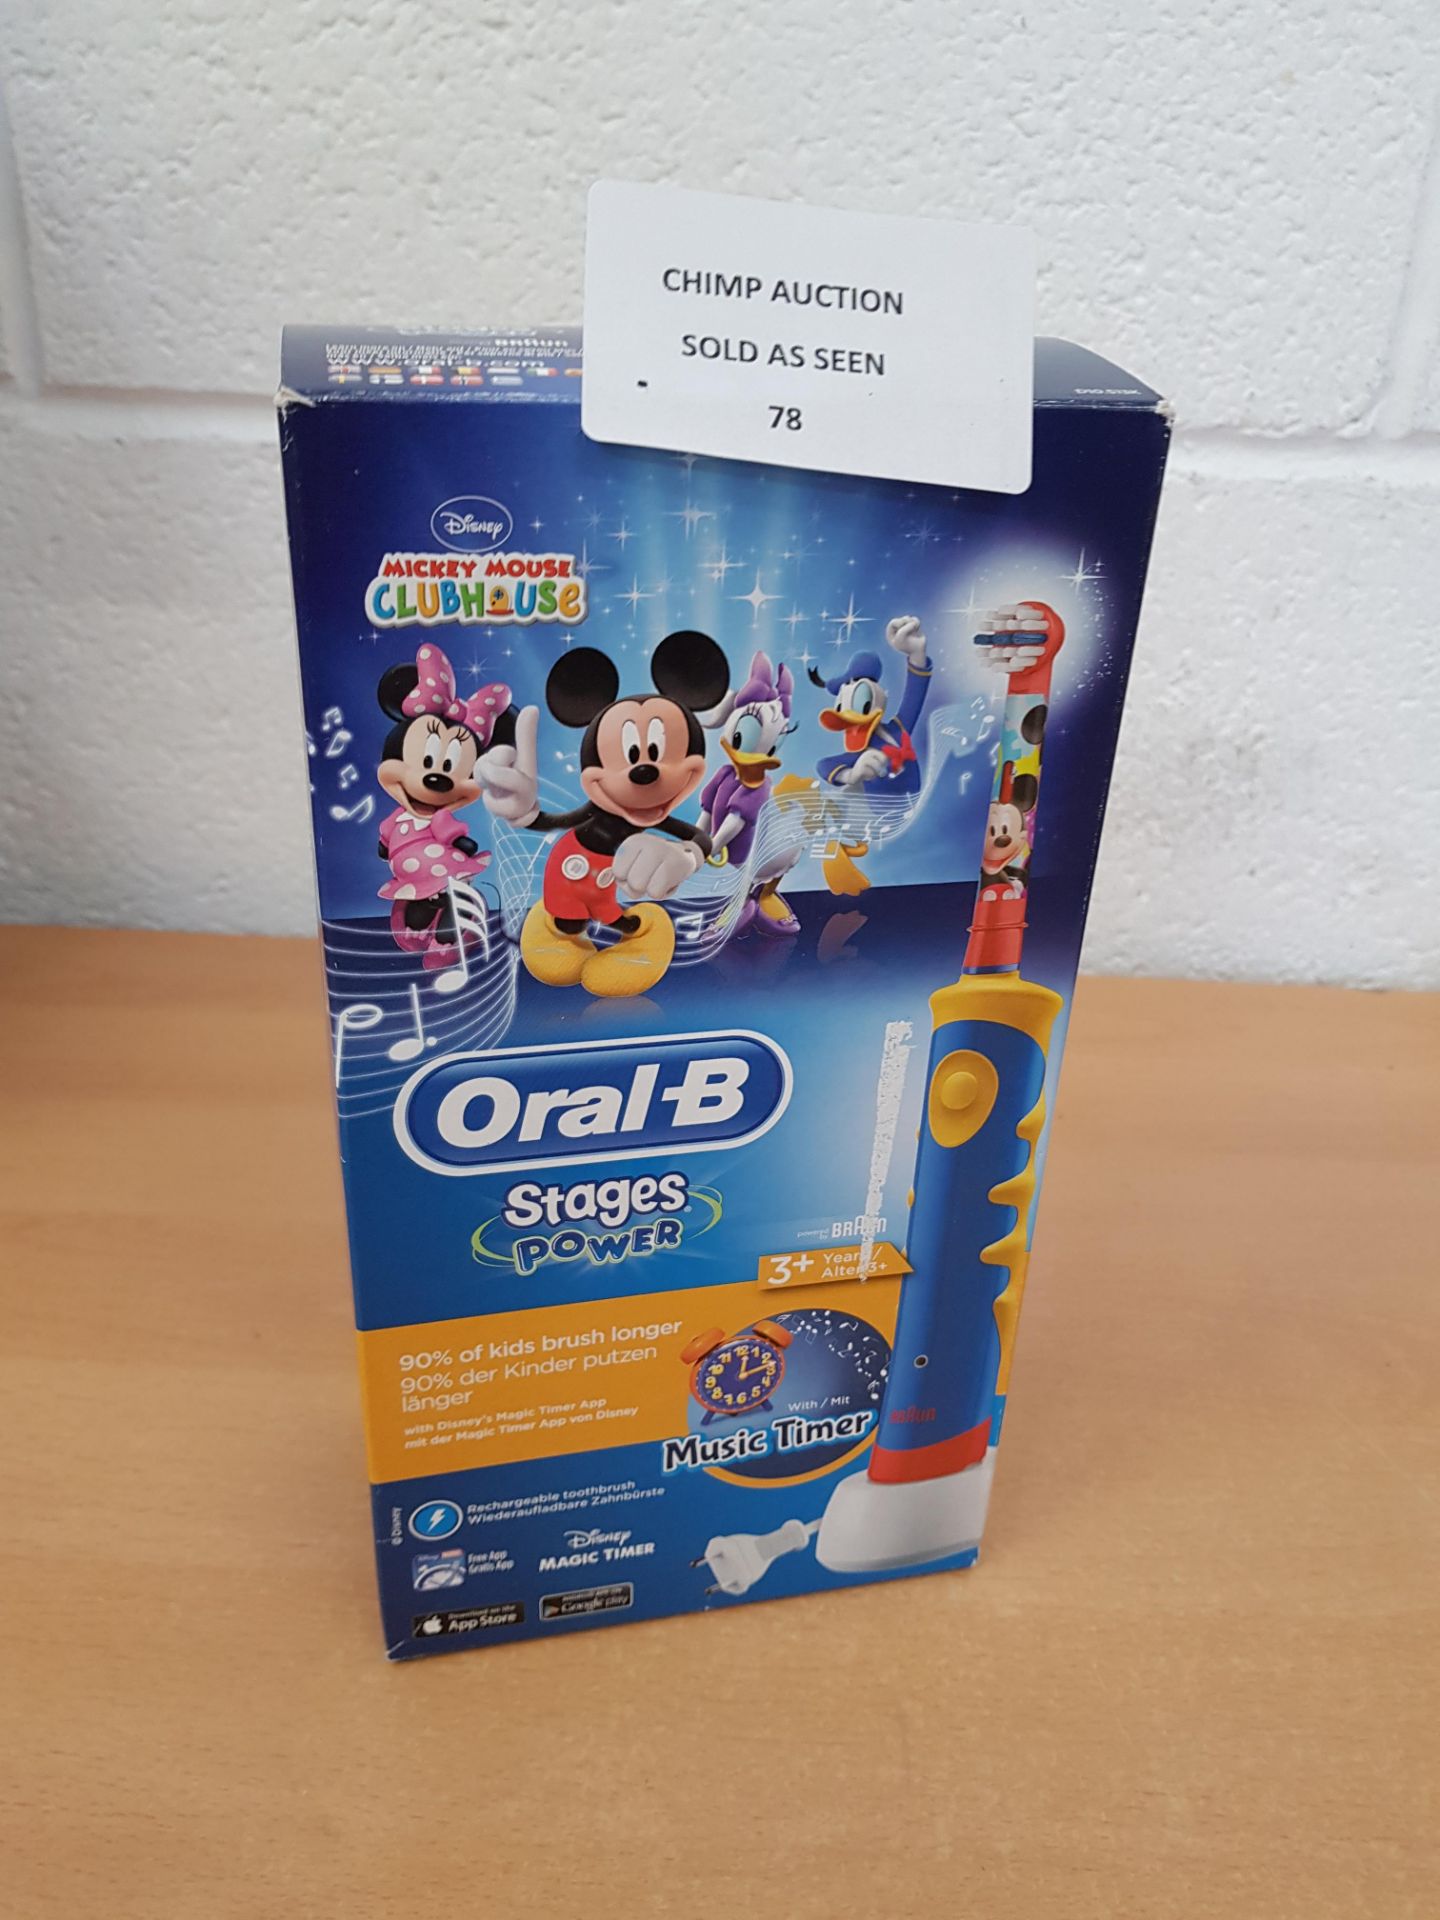 Oral-B Stages Powers electric kids toothbrush